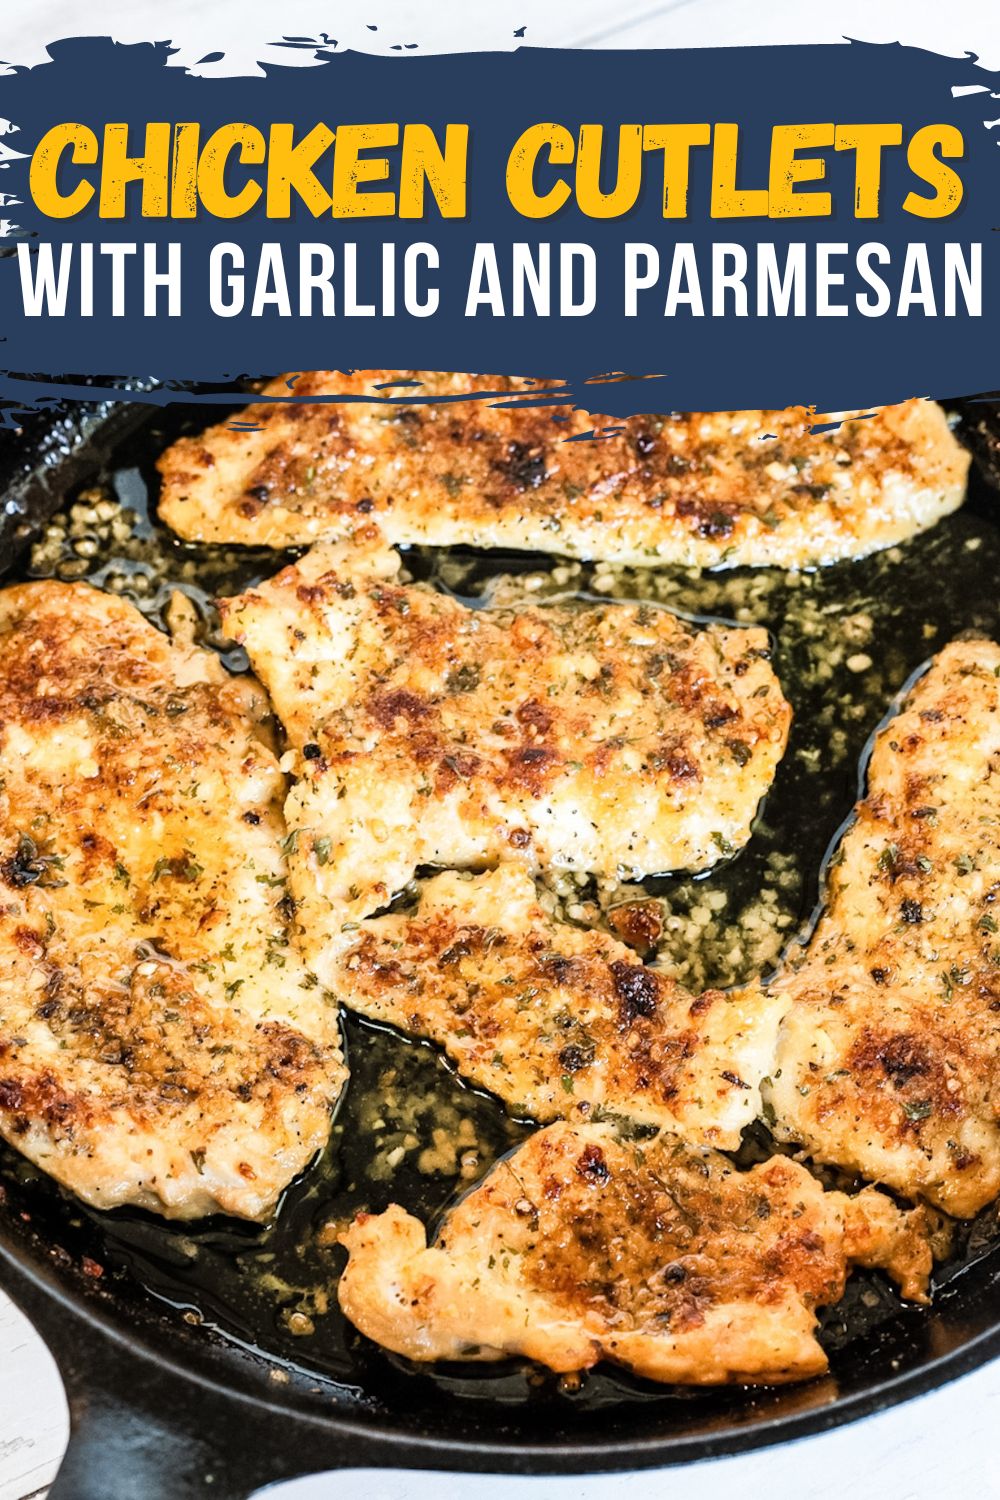 Garlic Parmesan Chicken Cutlets cooked in the oven and served in a cast iron skillet, with a blue banner featuring white and yellow text overlay.